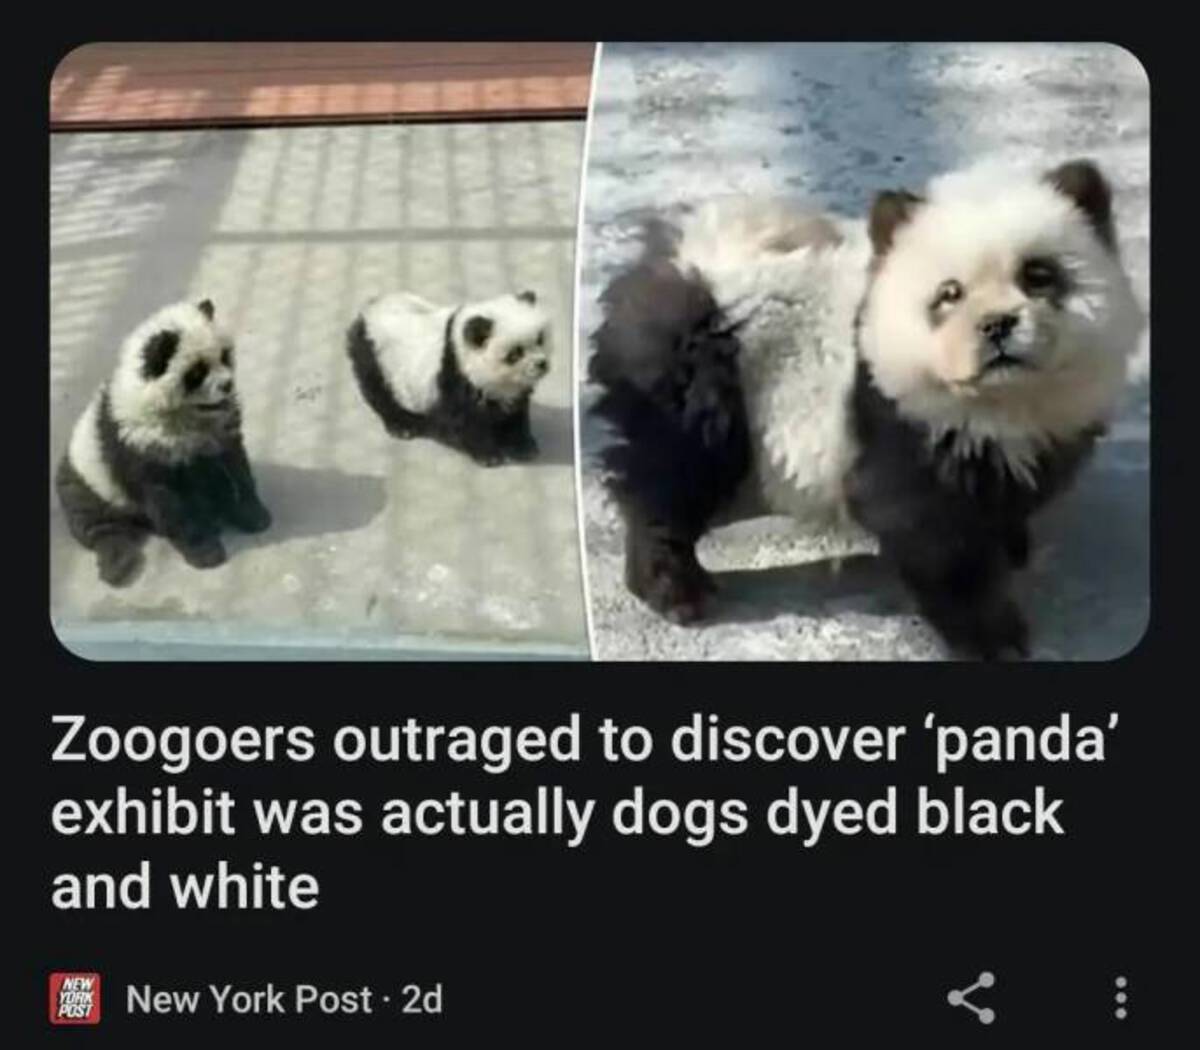 panda - Zoogoers outraged to discover 'panda' exhibit was actually dogs dyed black and white New York Post New York Post 2d